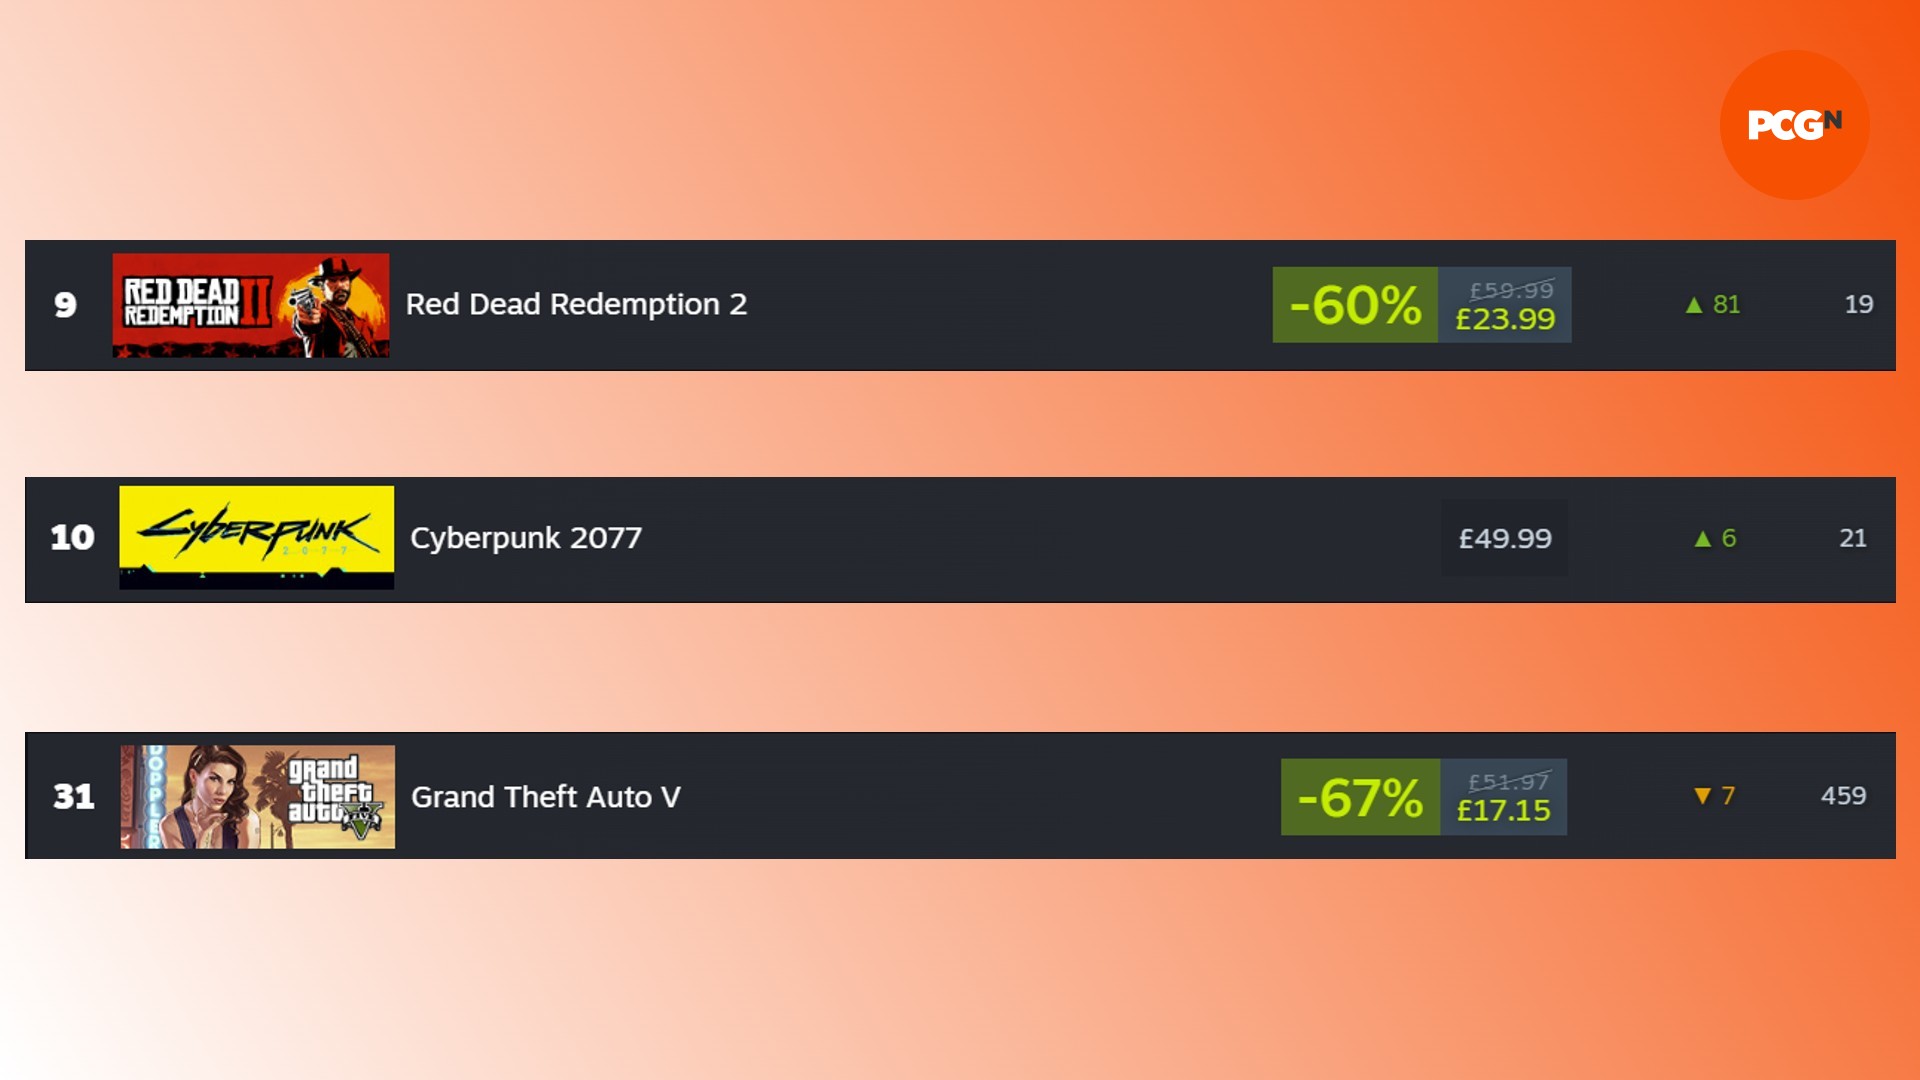 Red Dead Redemption 2 Steam sales: A comparison of GTA 5 and RDR 2 on Steam